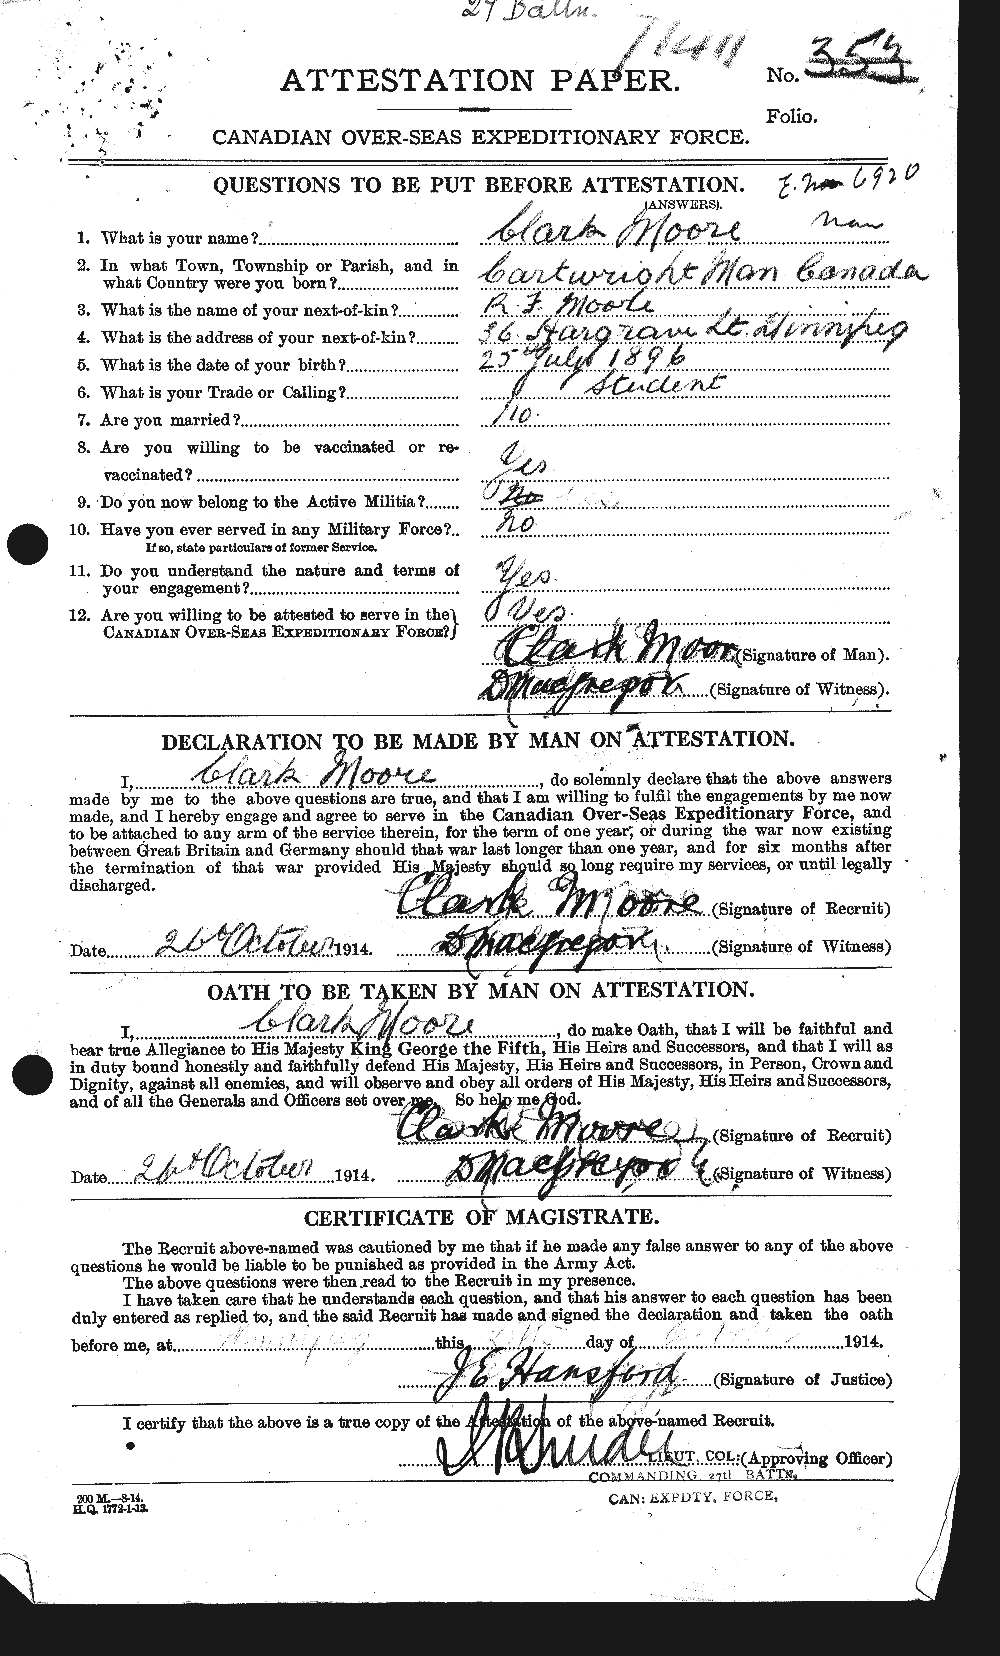 Personnel Records of the First World War - CEF 506537a